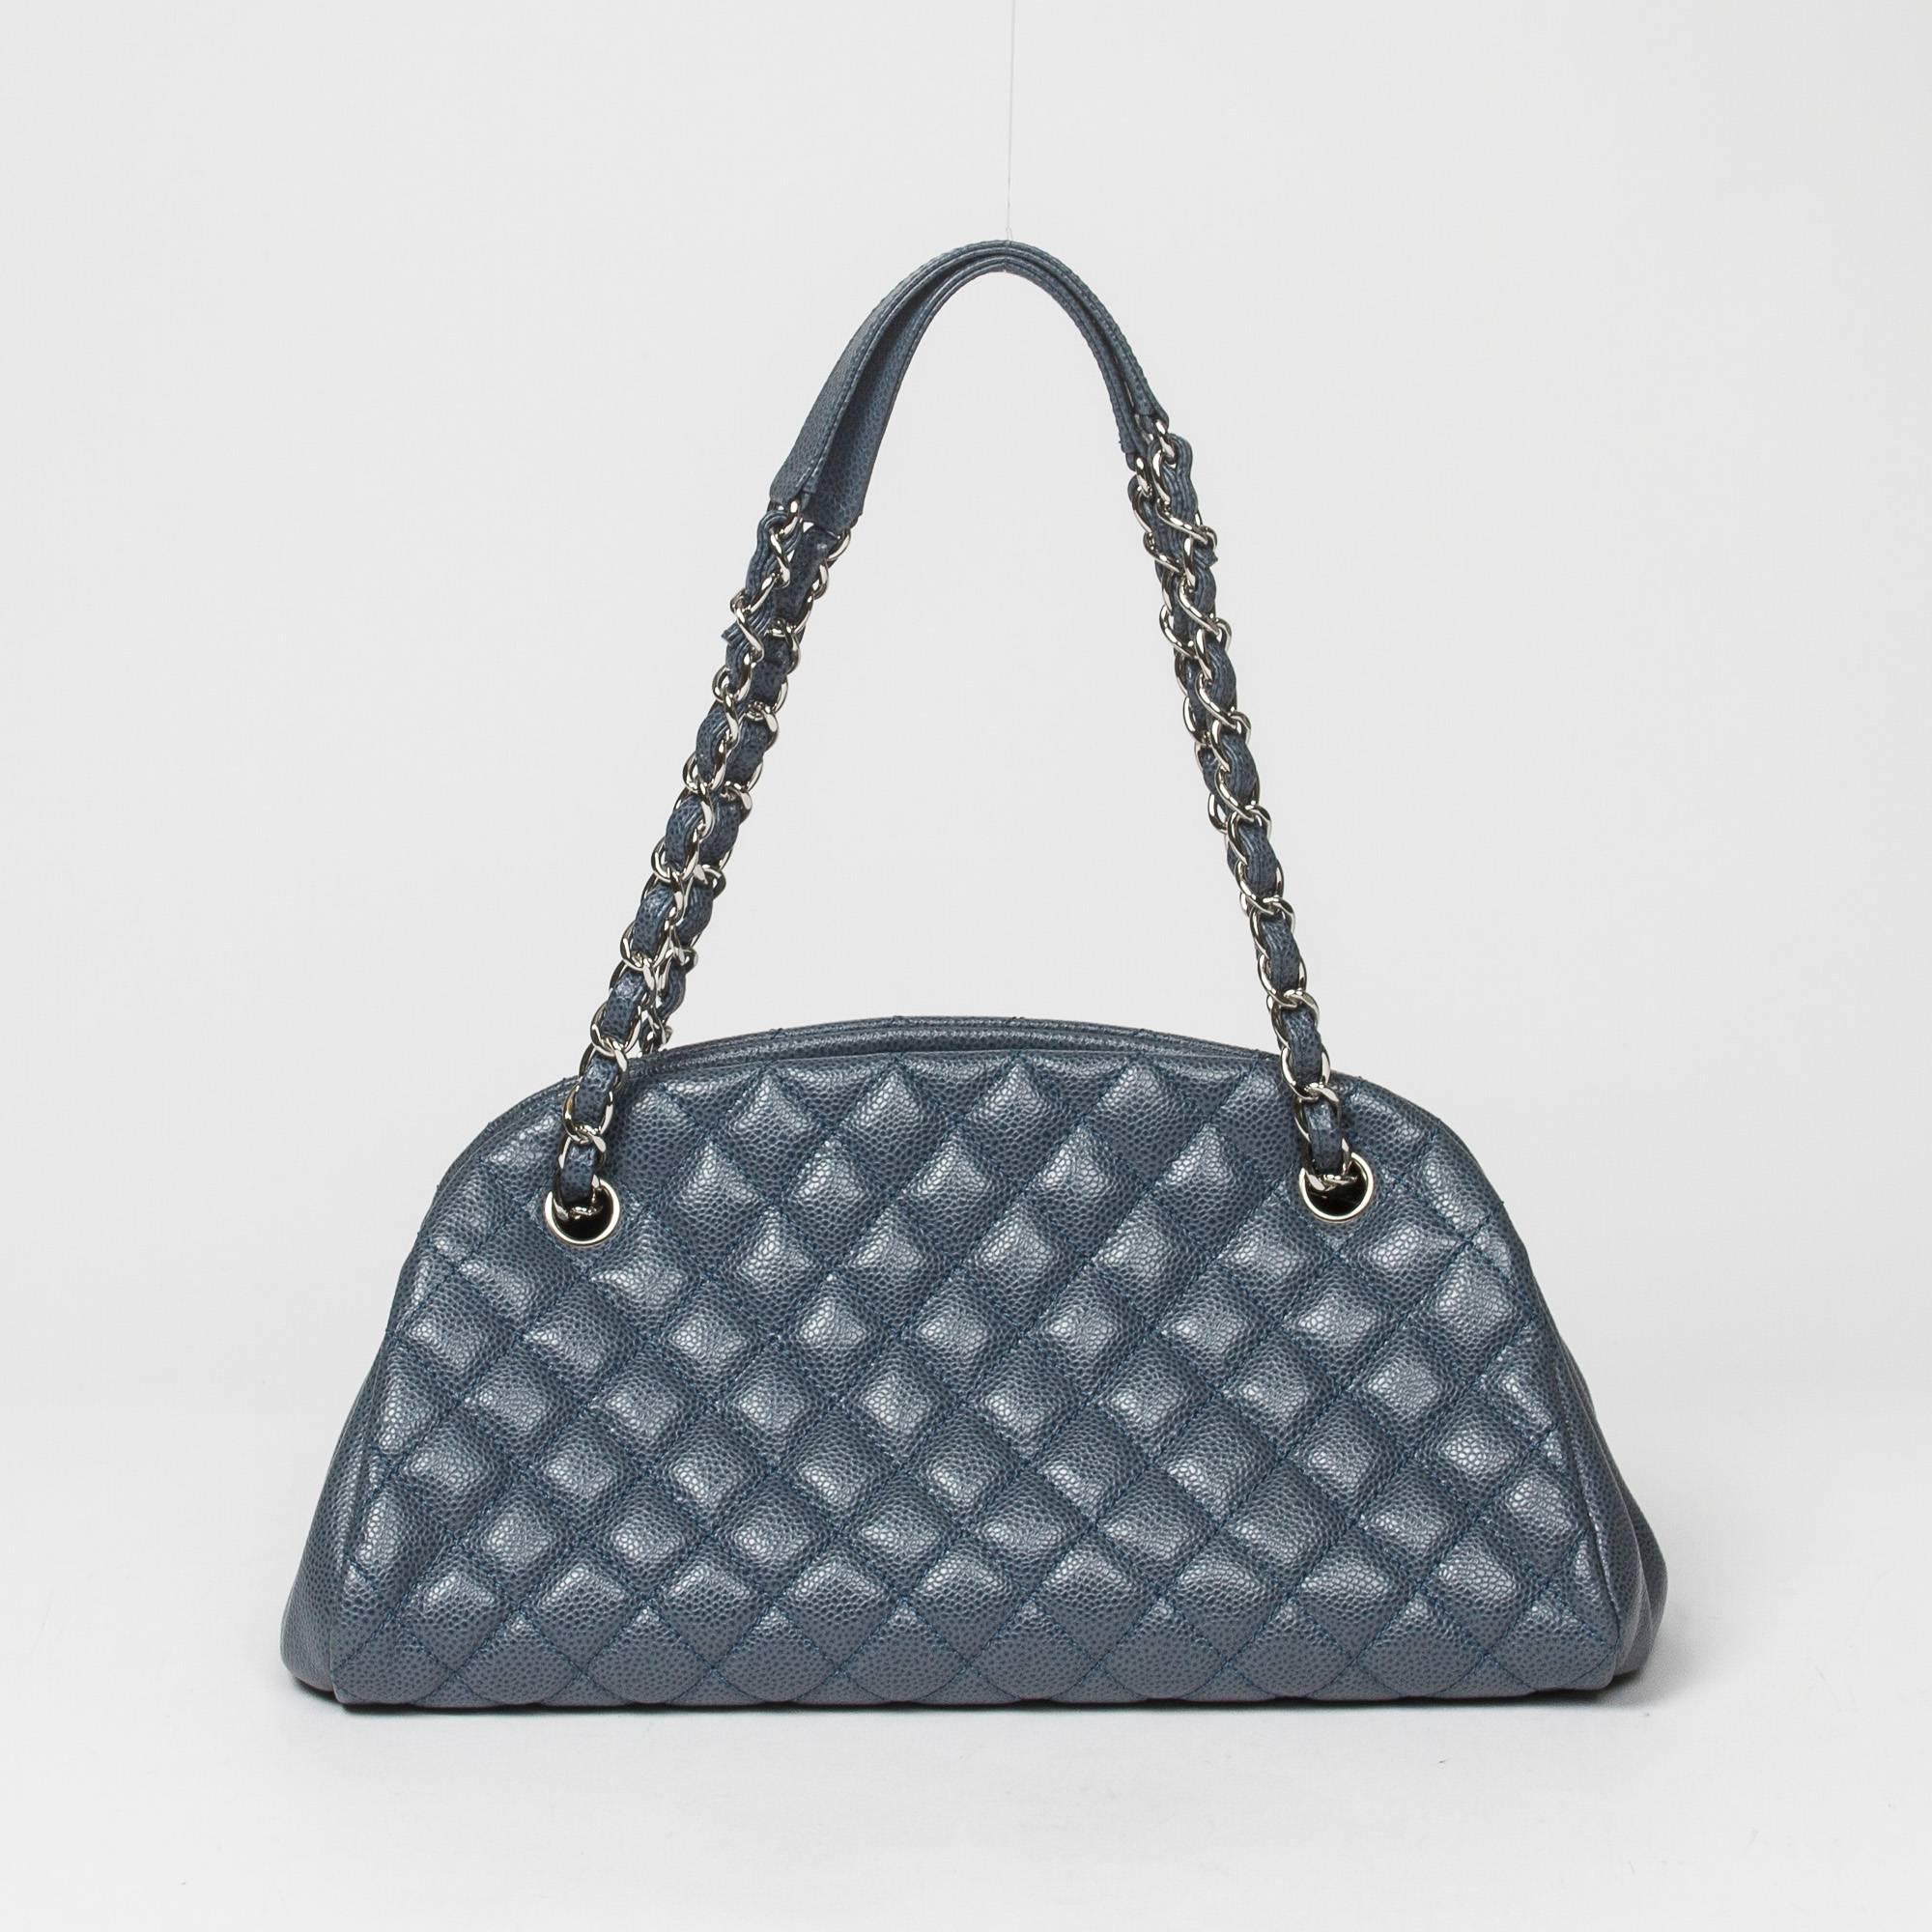 Women's Chanel Handbag in light blue caviar quilted calf leather